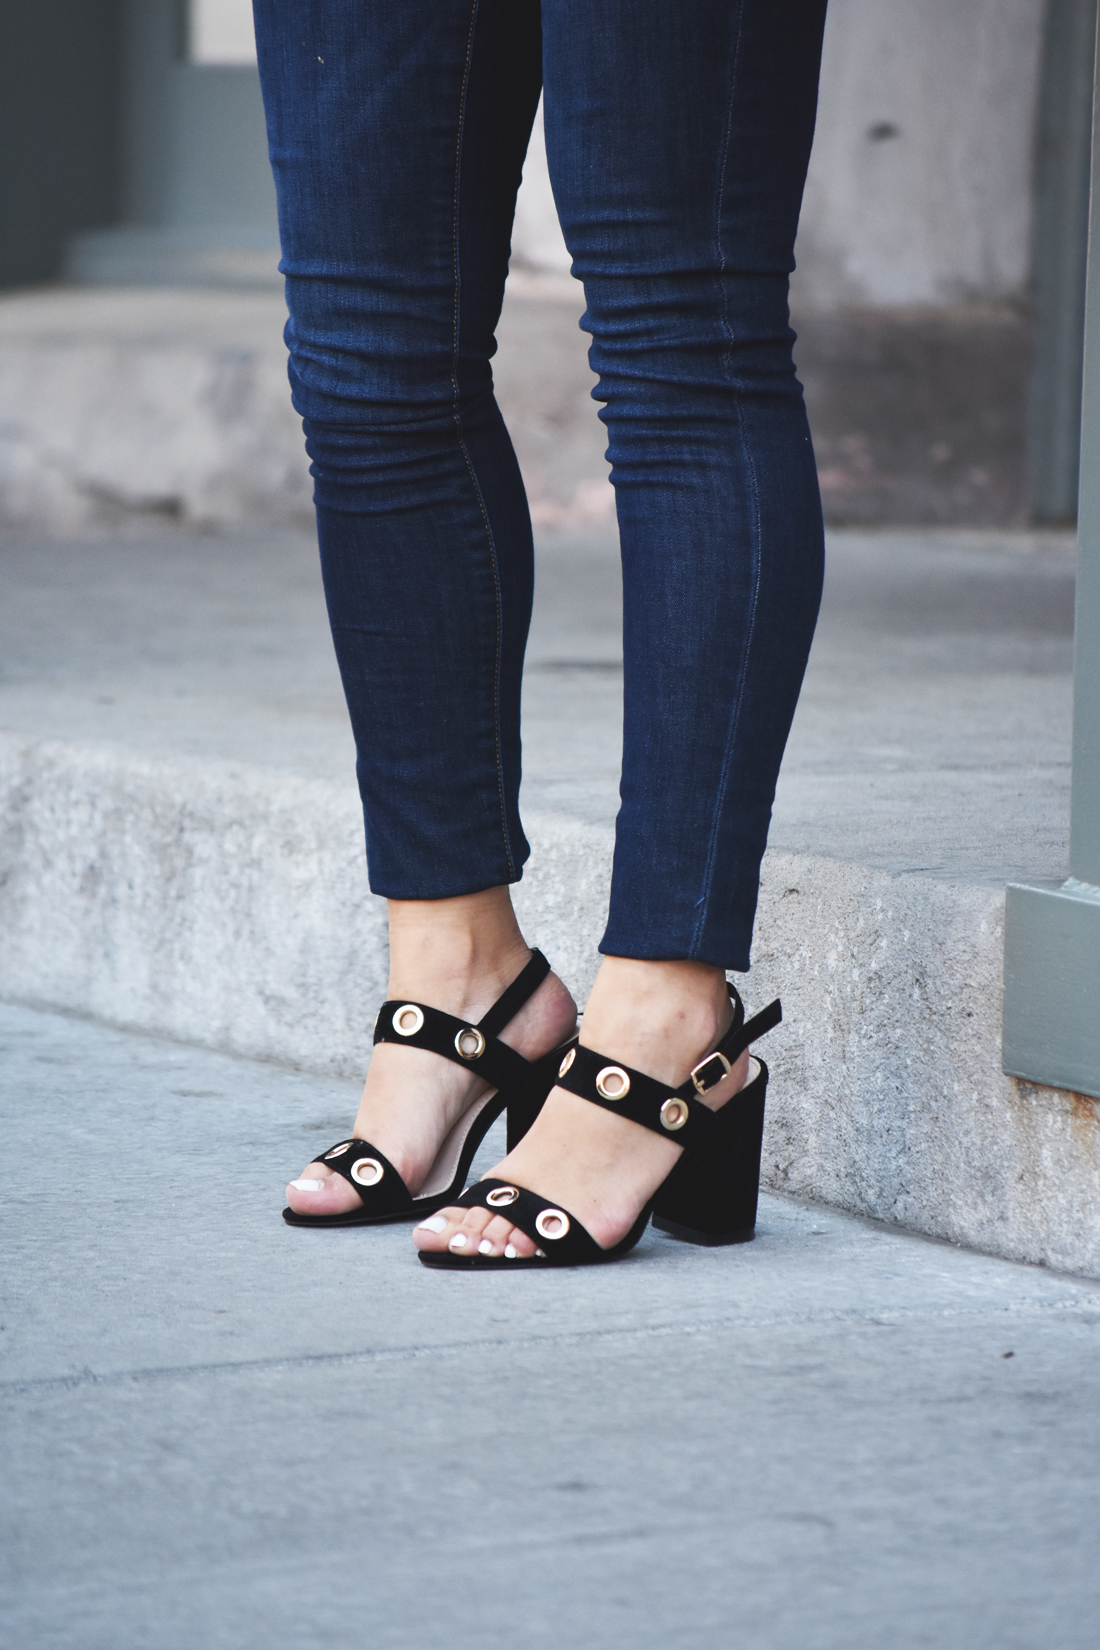 Public Desire black sandals, and Old Navy Rockstar skinny jeans - MY GO-TO CASUAL OUTFIT by popular Denver fashion blogger Chic Talk